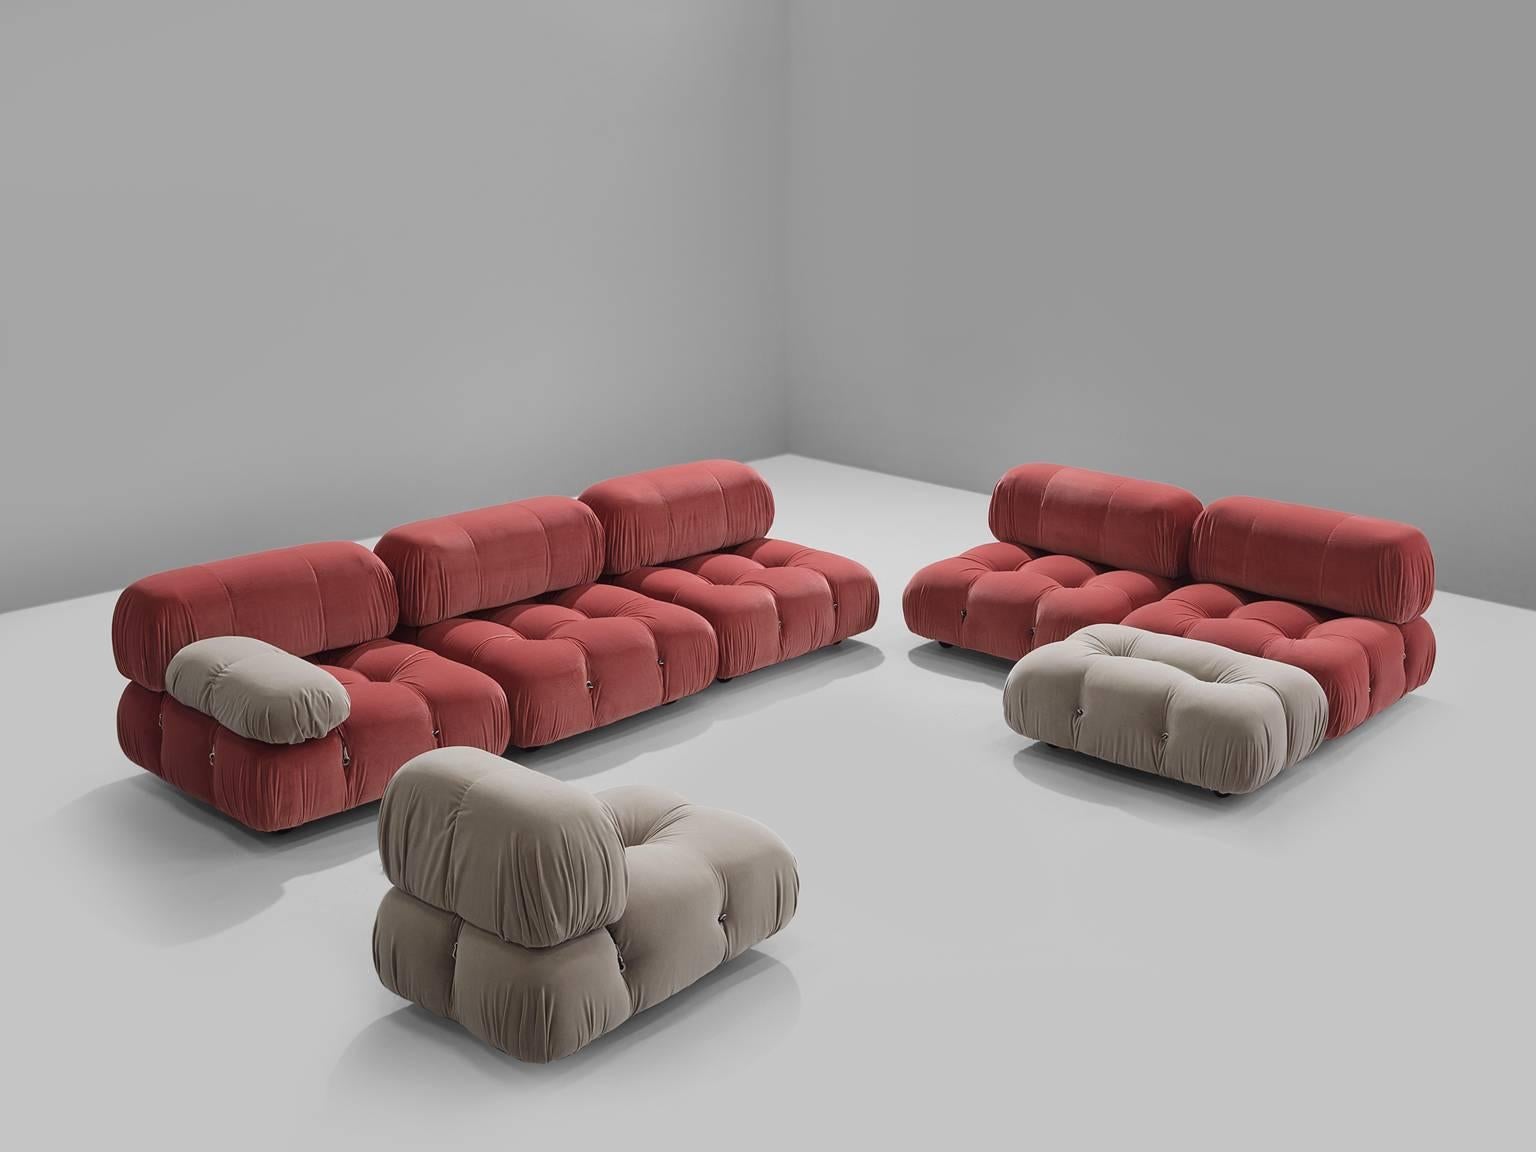 Mario Bellini, large modular 'Cameleonda' sofa in pink and grey Italy 1972.

The sectional elements of this can be used freely and apart from one another. The backs and armrests are provided with rings and carabiners, which allows the user to create